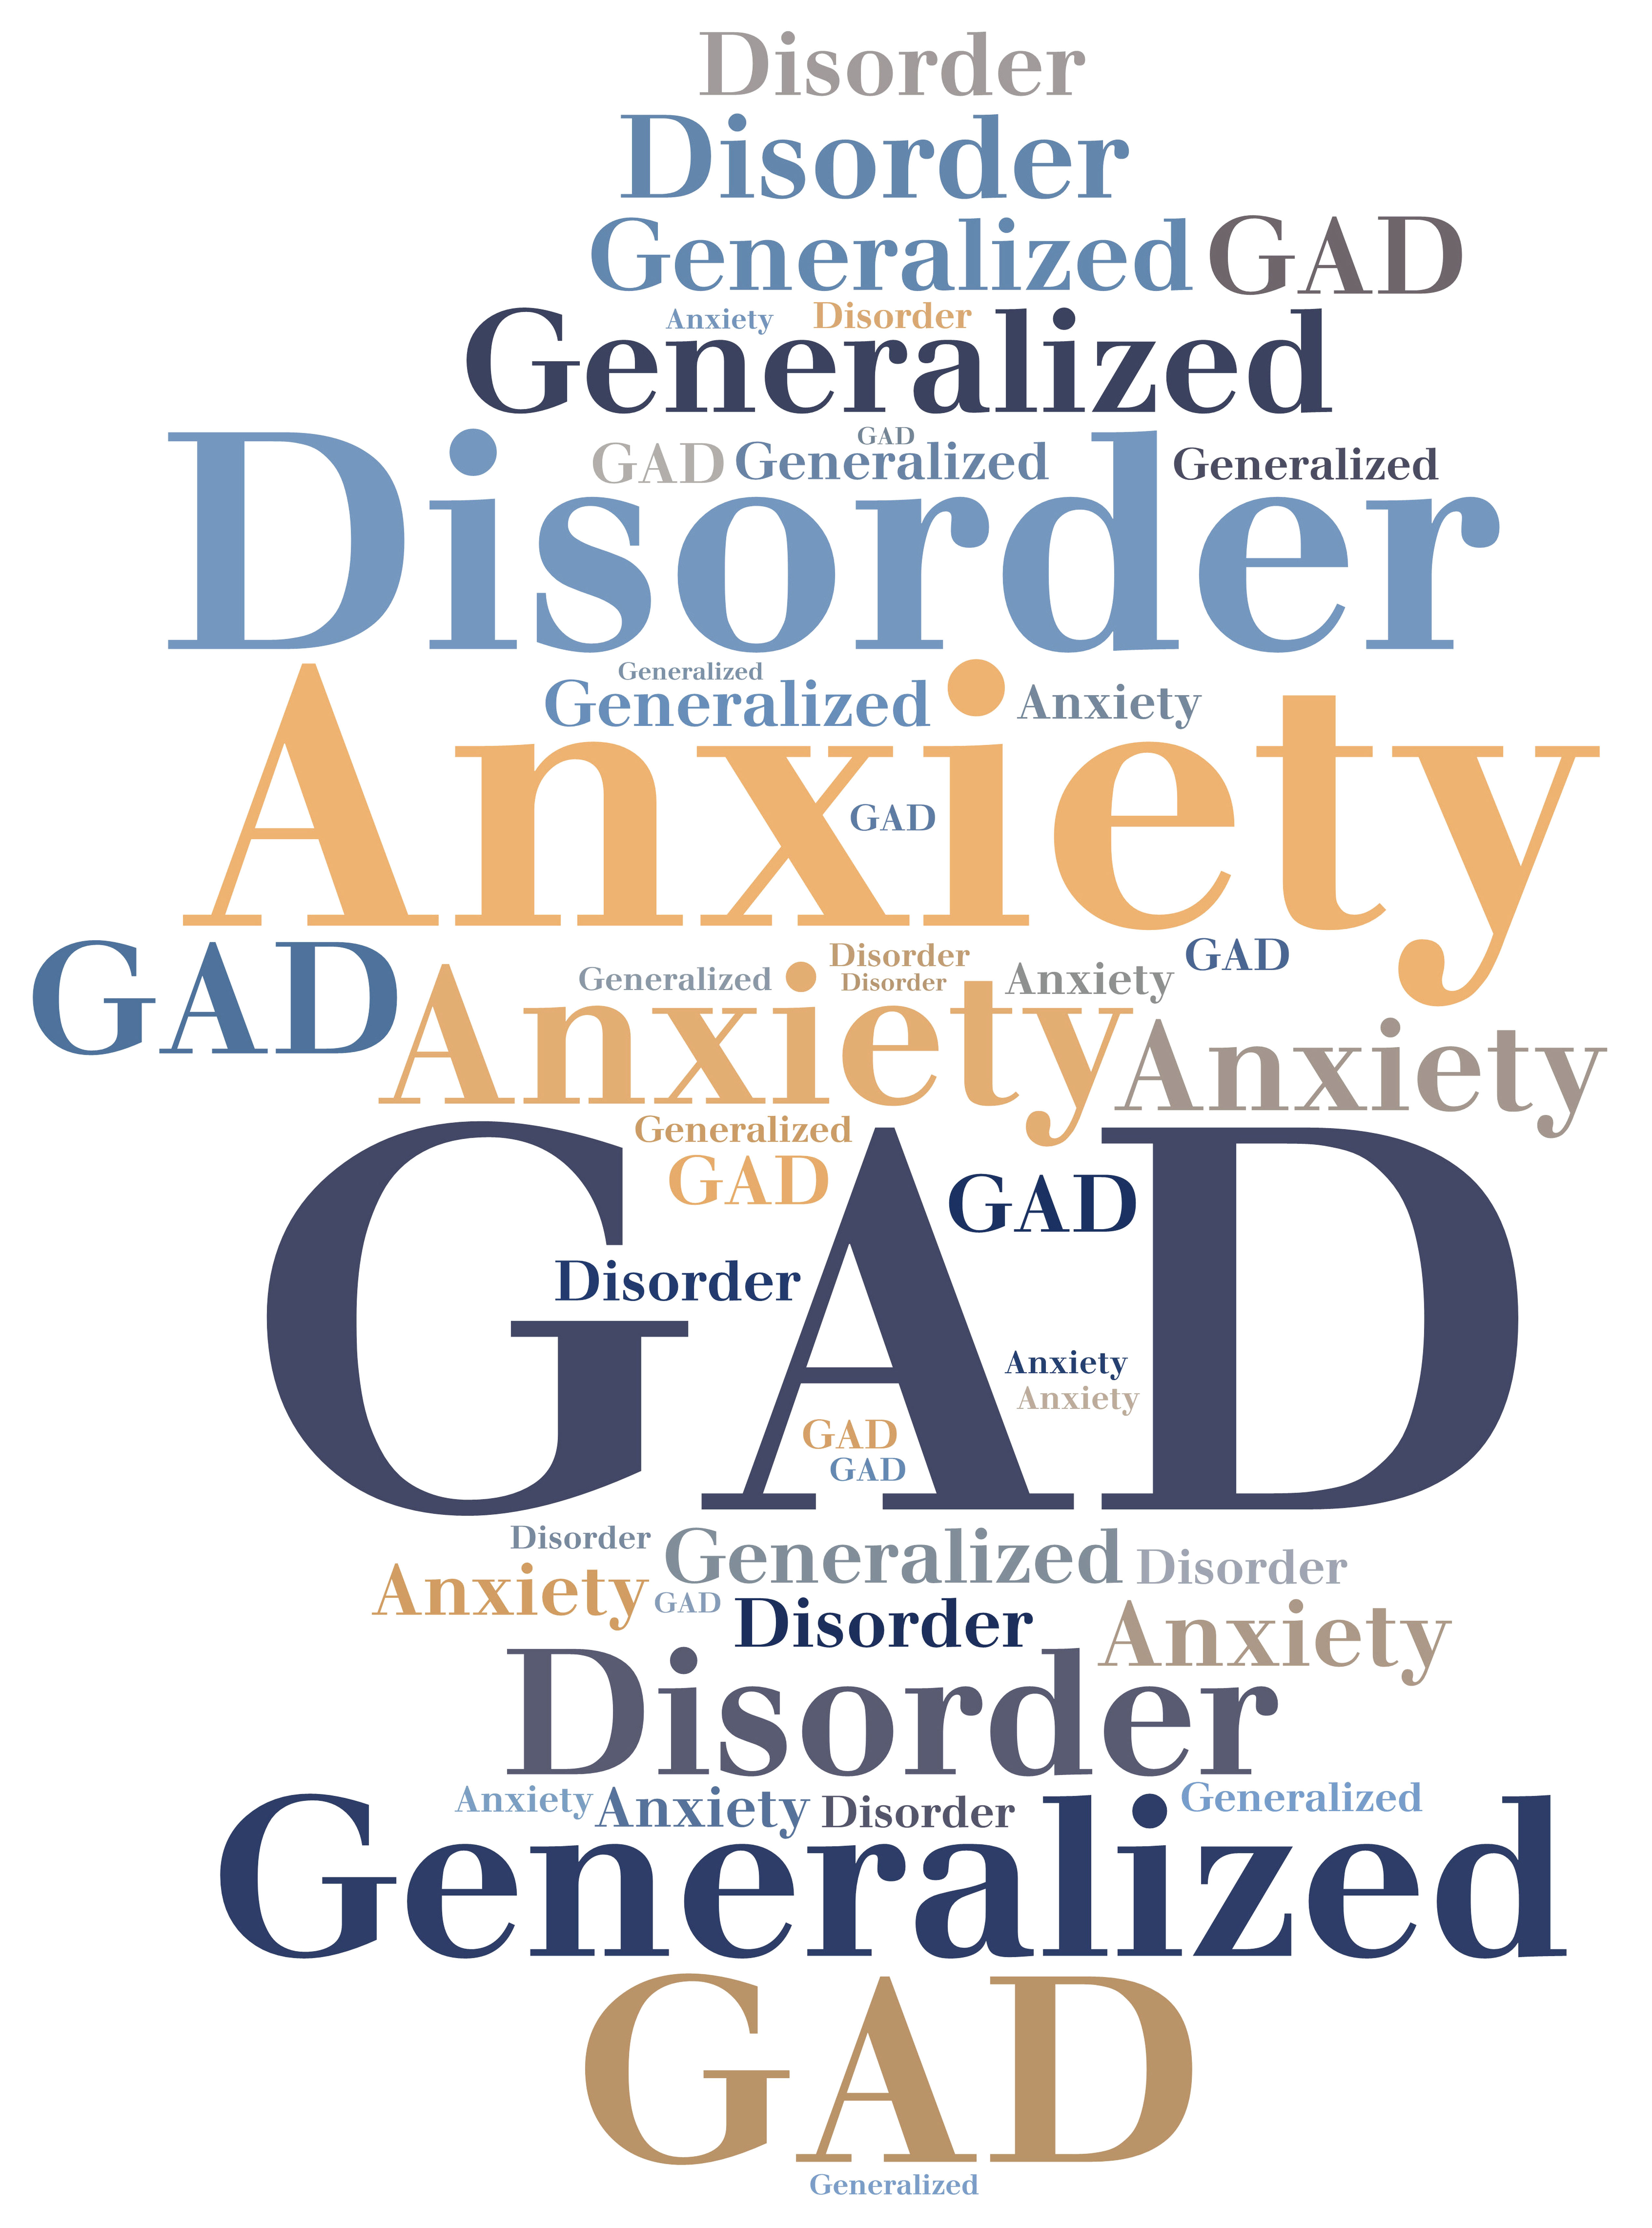 GAD - Generalized Anxiety Disorder. Disease abbreviation.